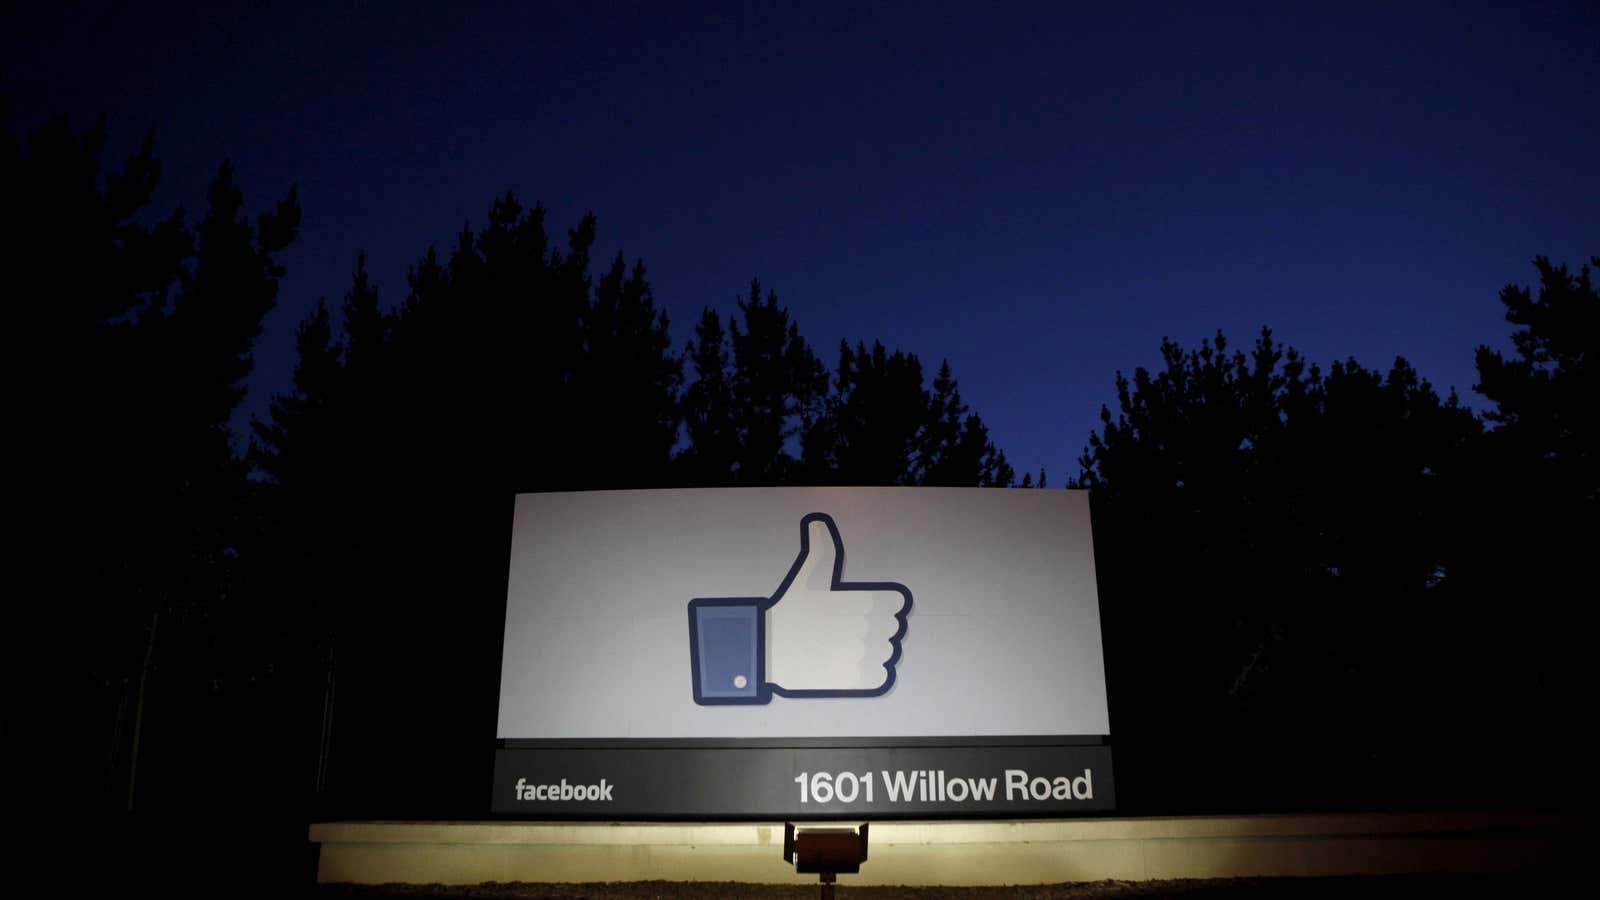 Will Facebook be with us forever?